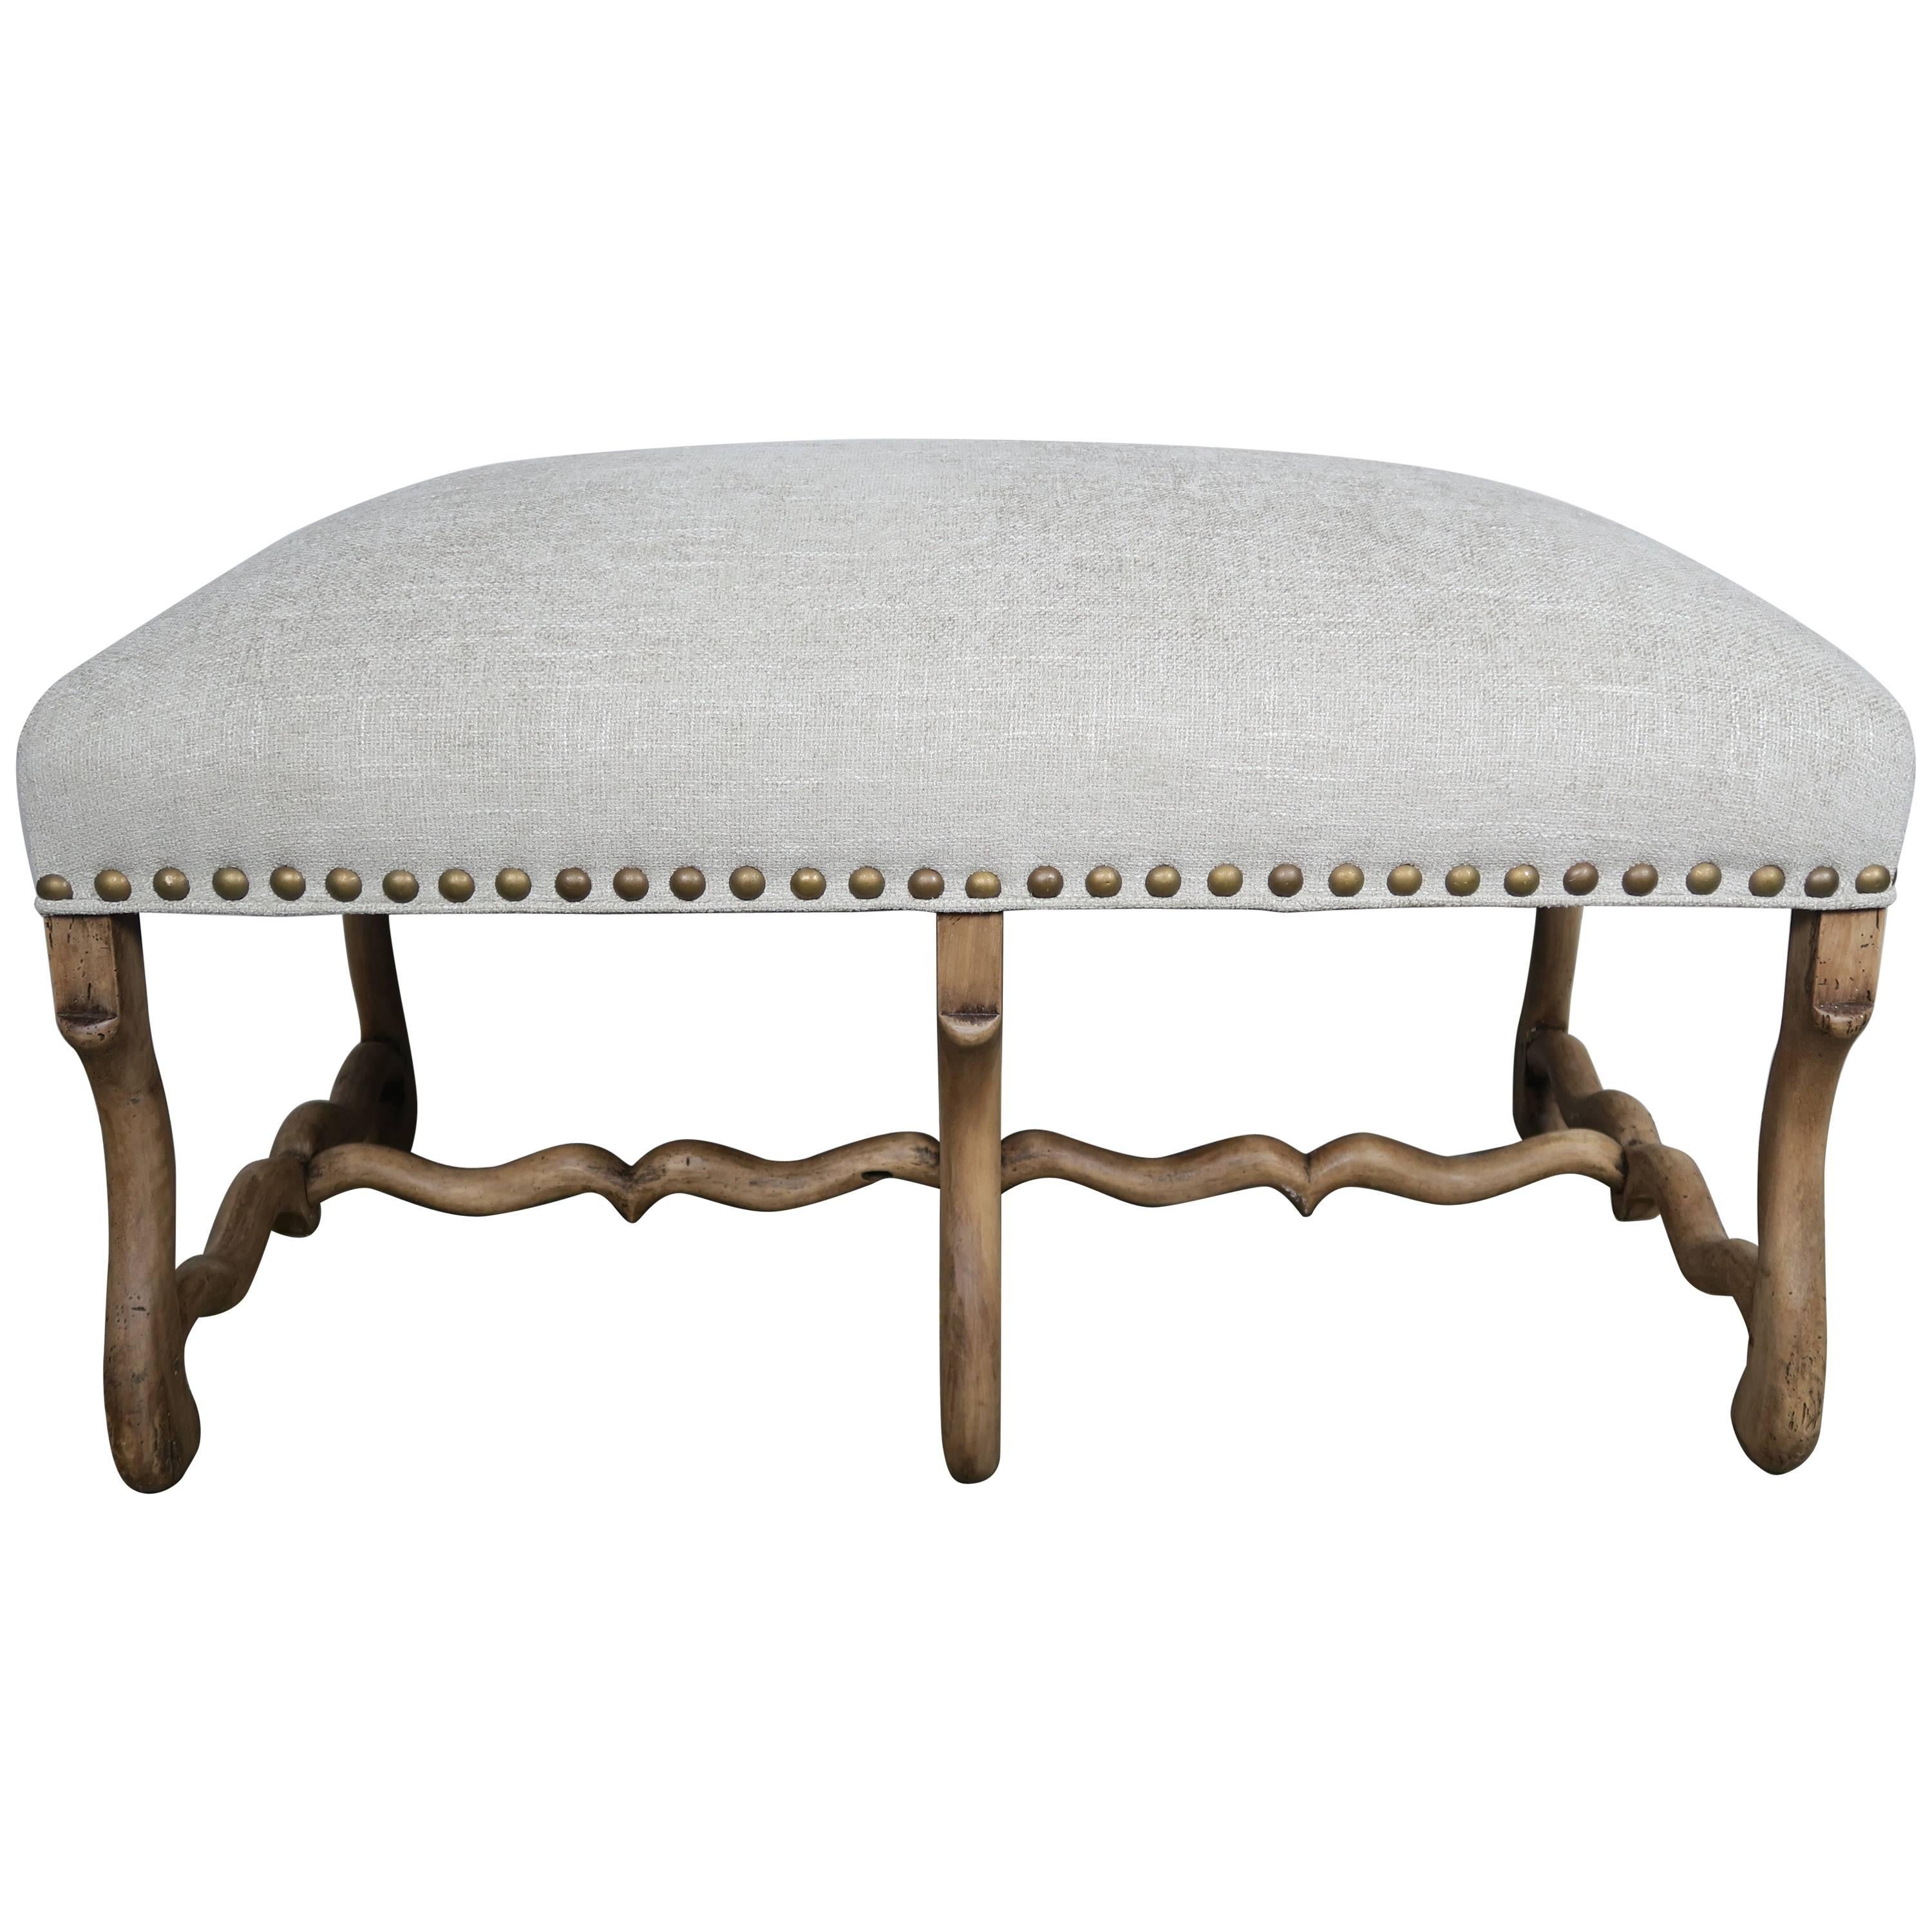 Spanish Walnut Bench with Linen Upholstery and Nailheads